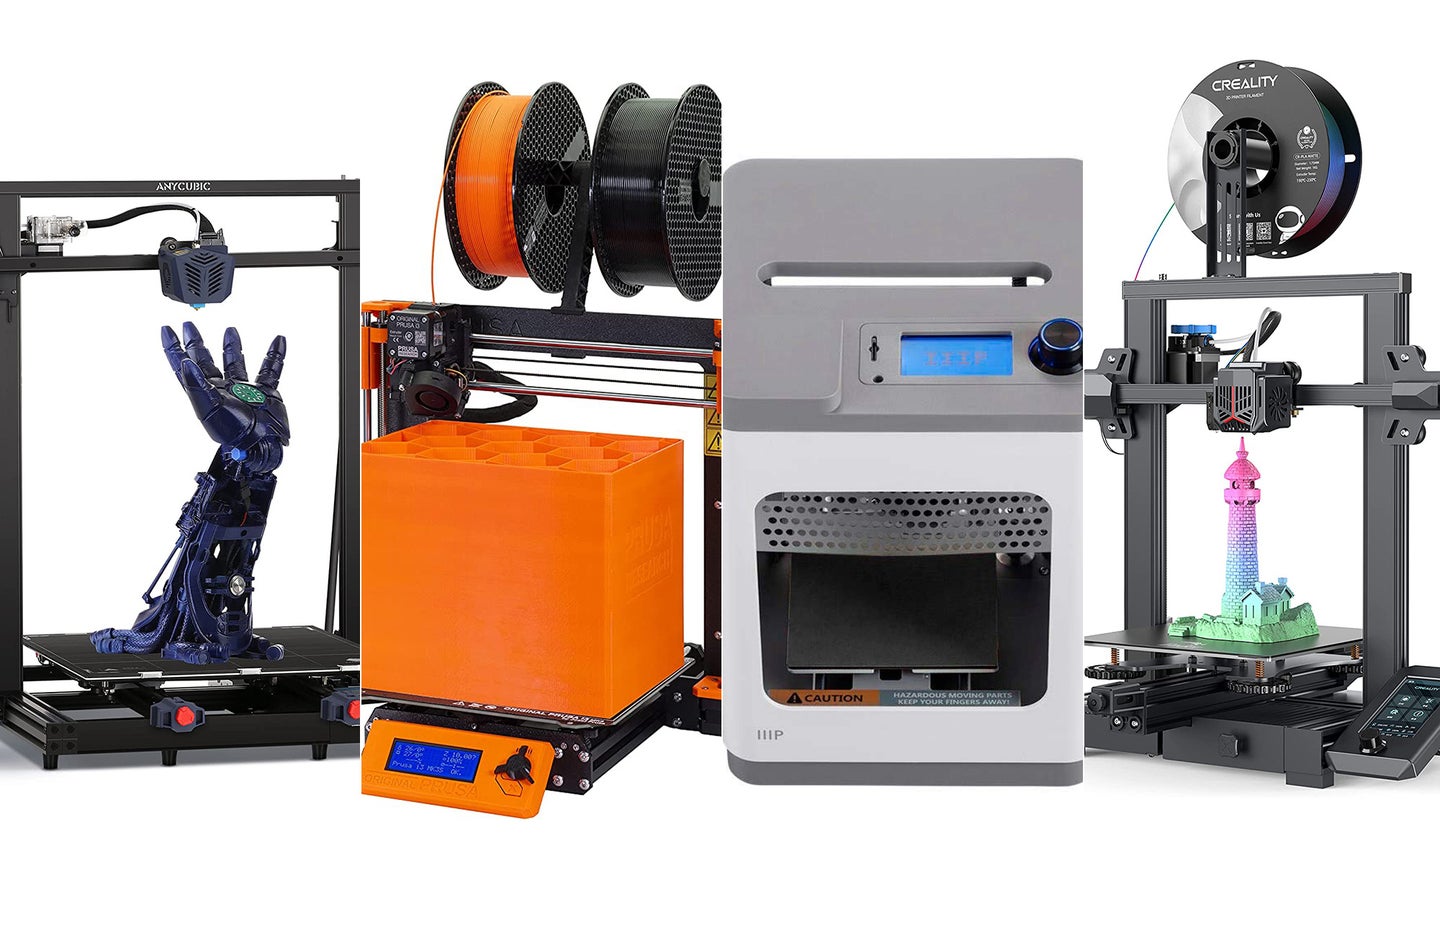 The best 3D printers for beginners composited